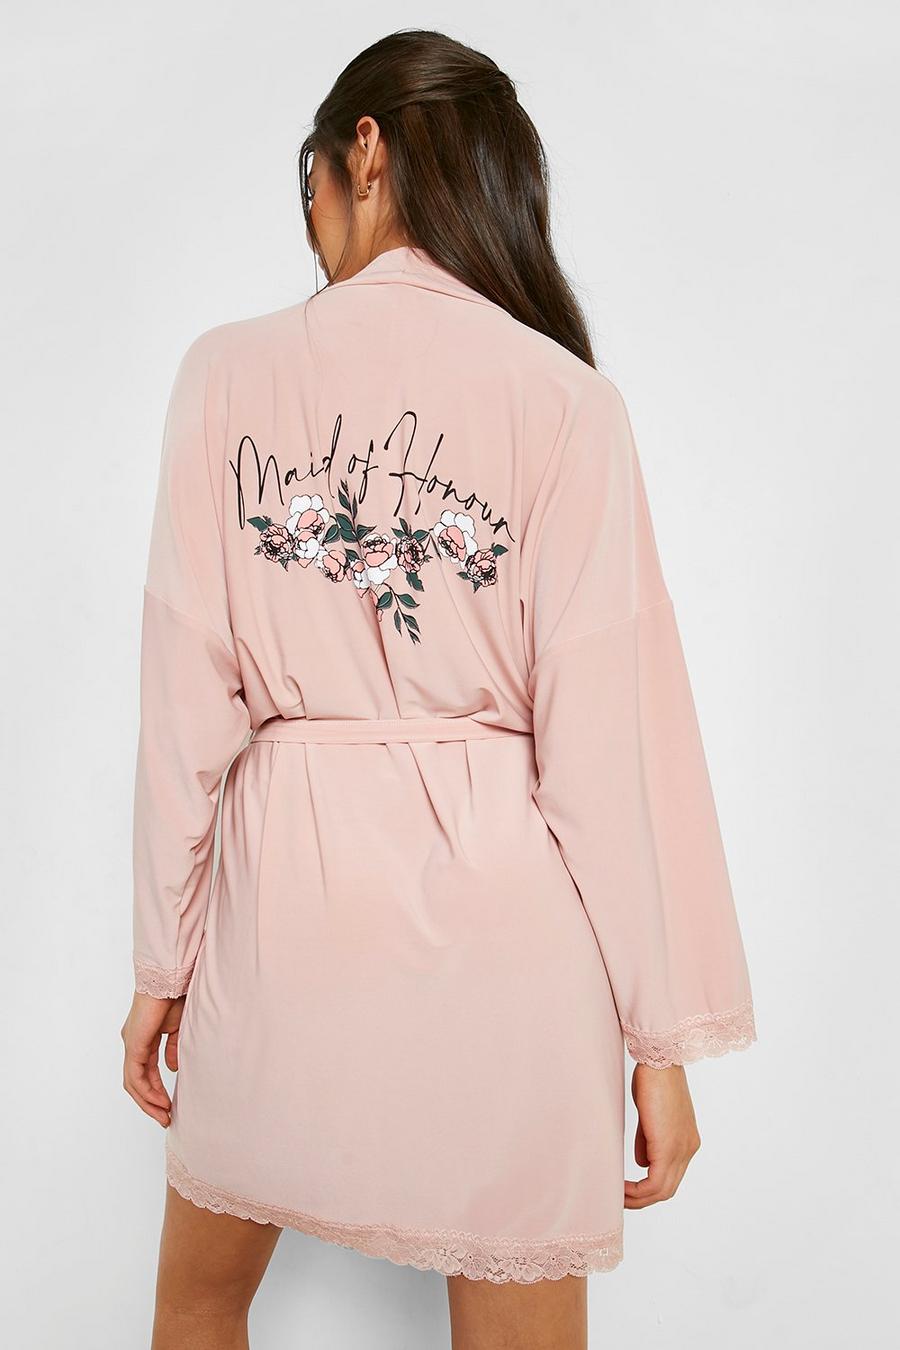 Blush rose Maid Of Honour Floral Lace Trim Robe 